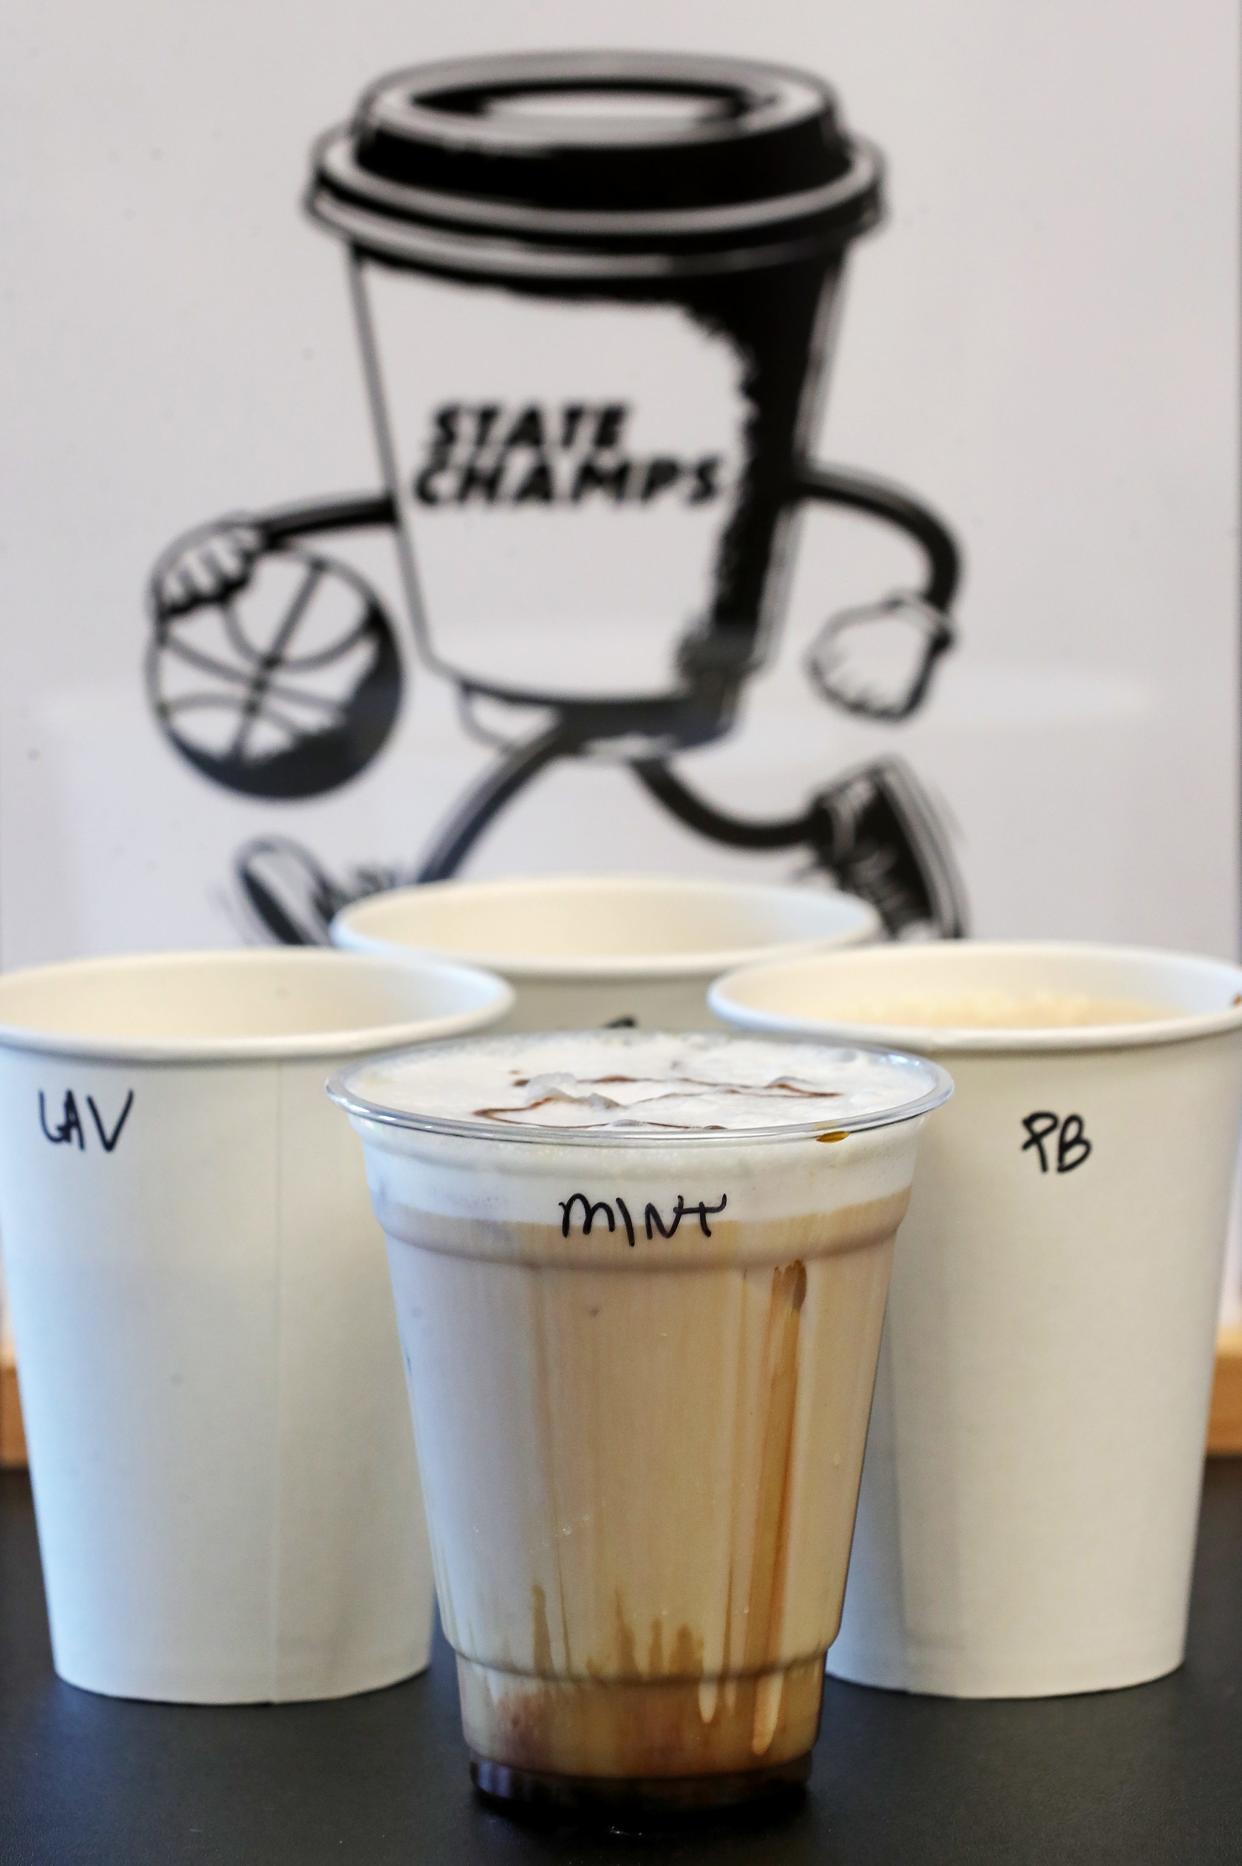 State Champs offers flights for adventurous coffee lovers.